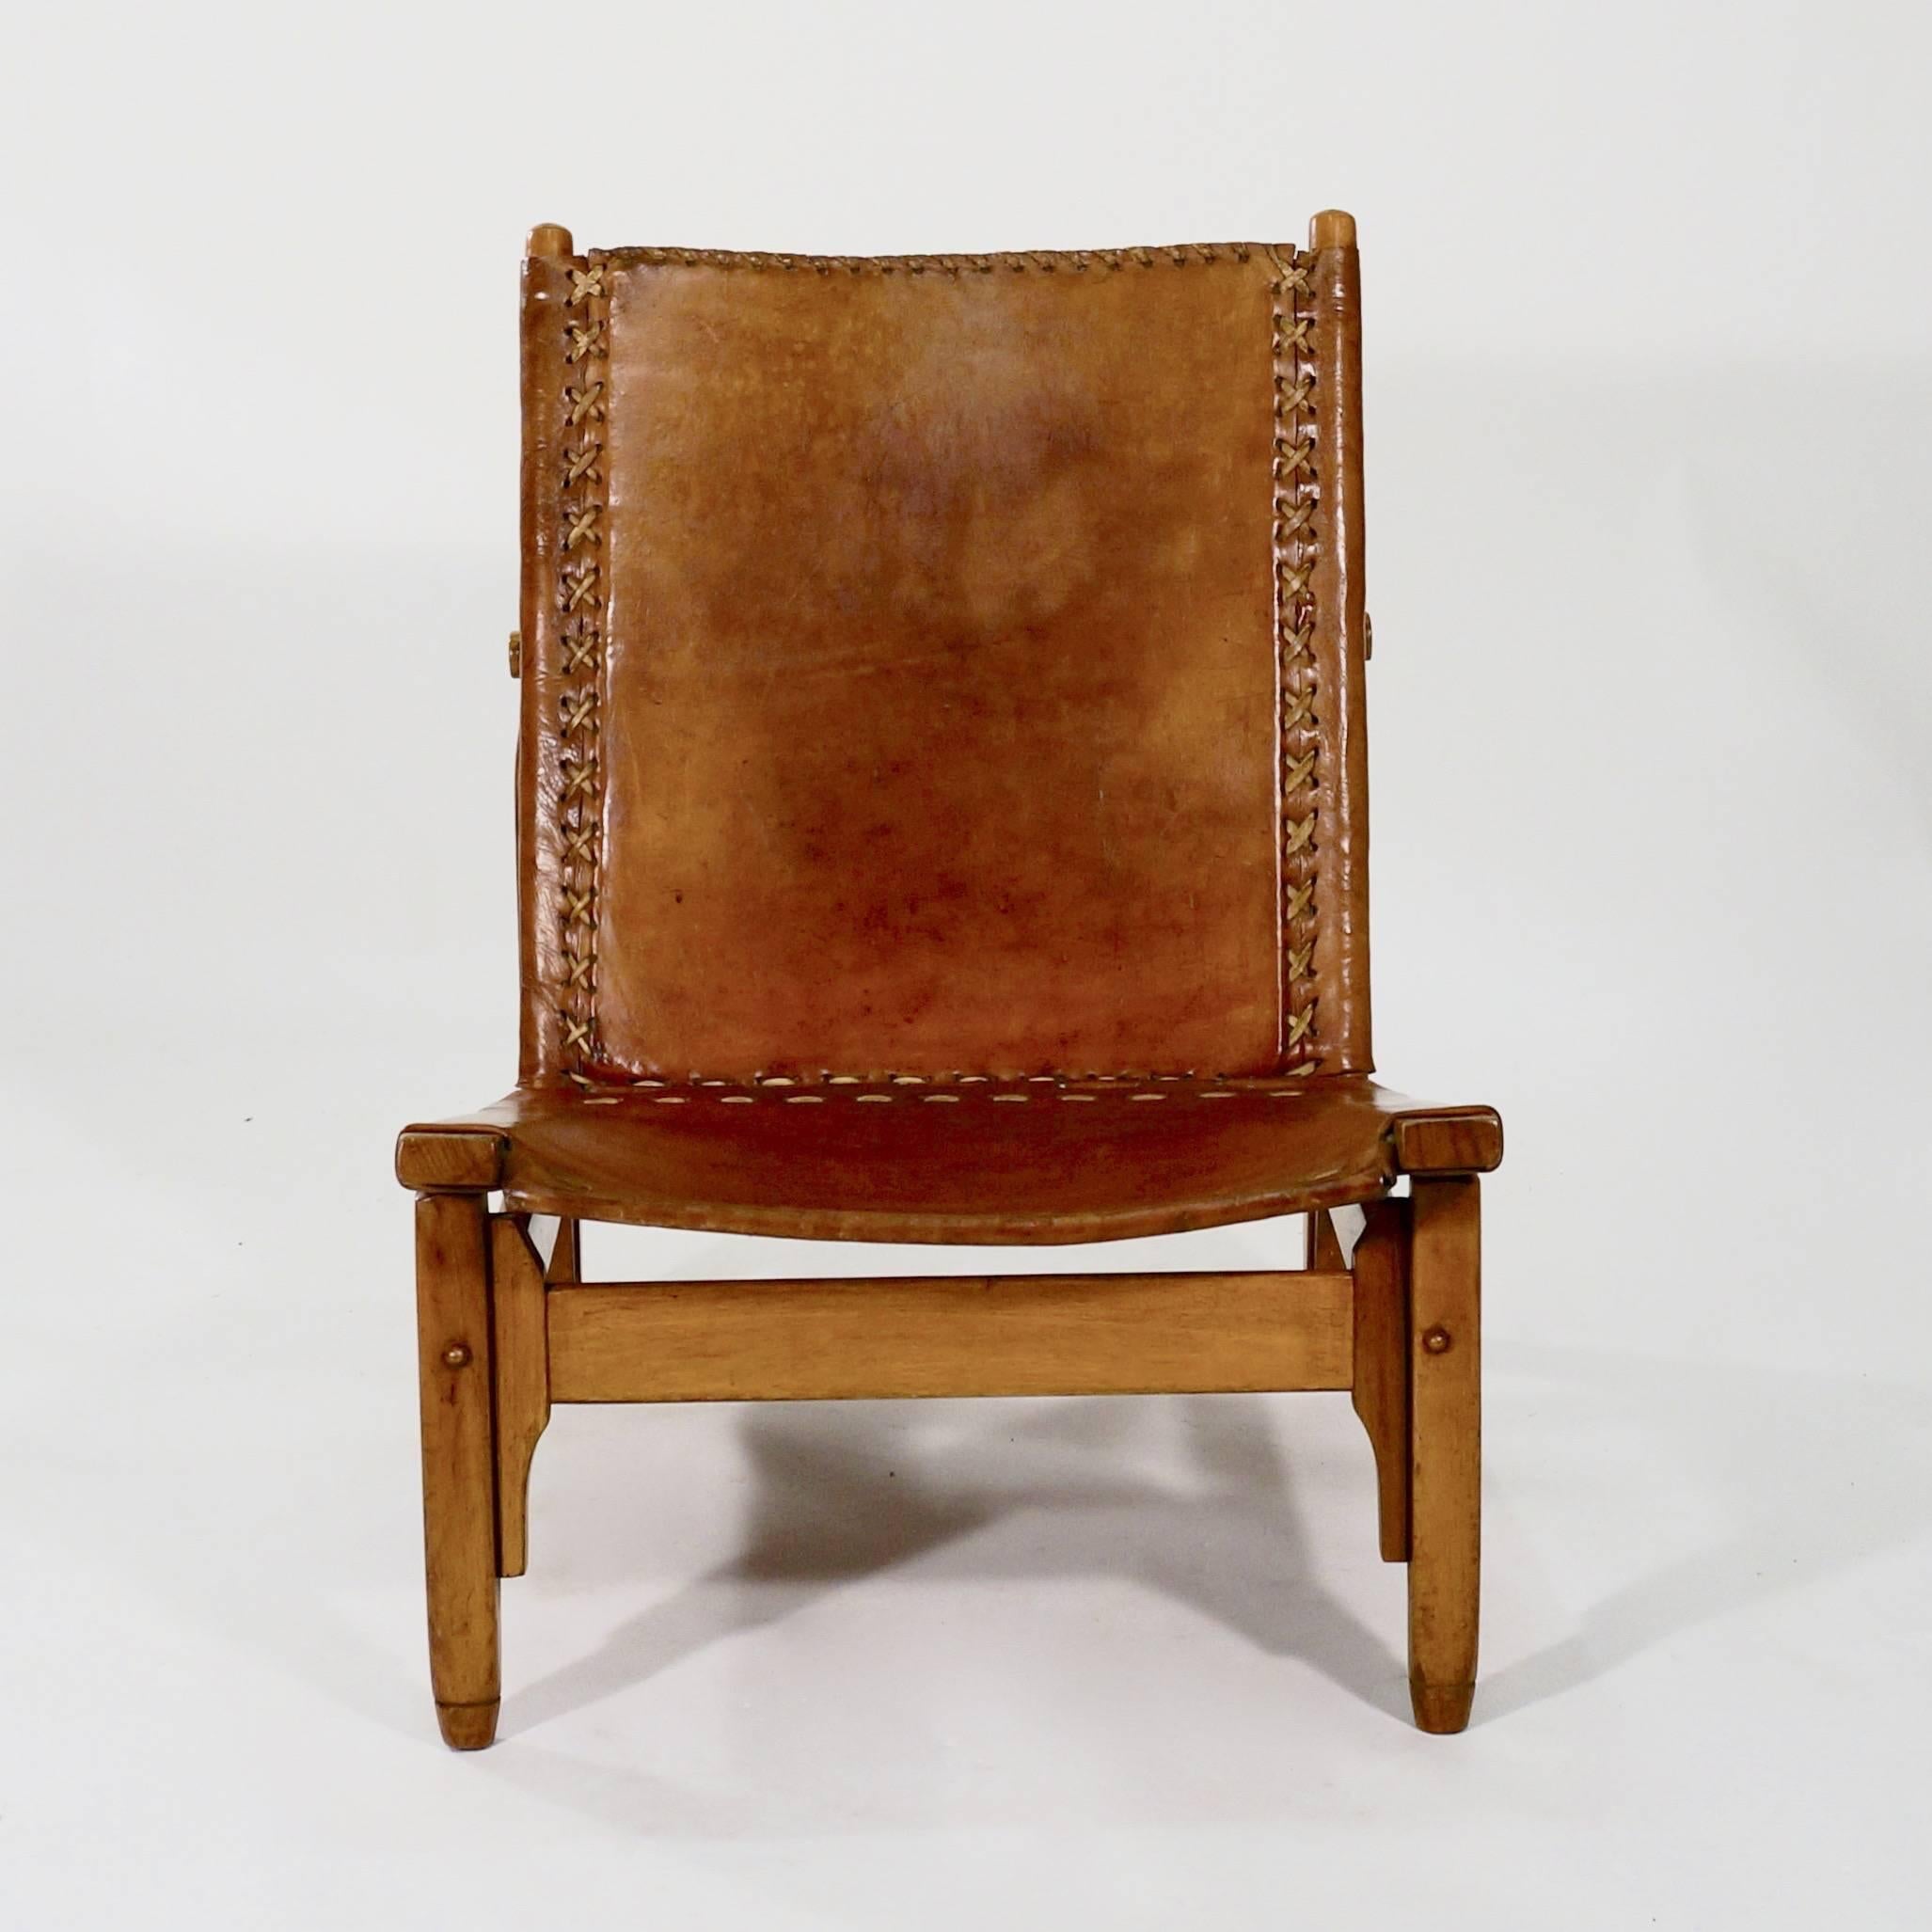 Scandinavian Modern Pair of Saddle-Stitched Leather and Walnut Low Chairs